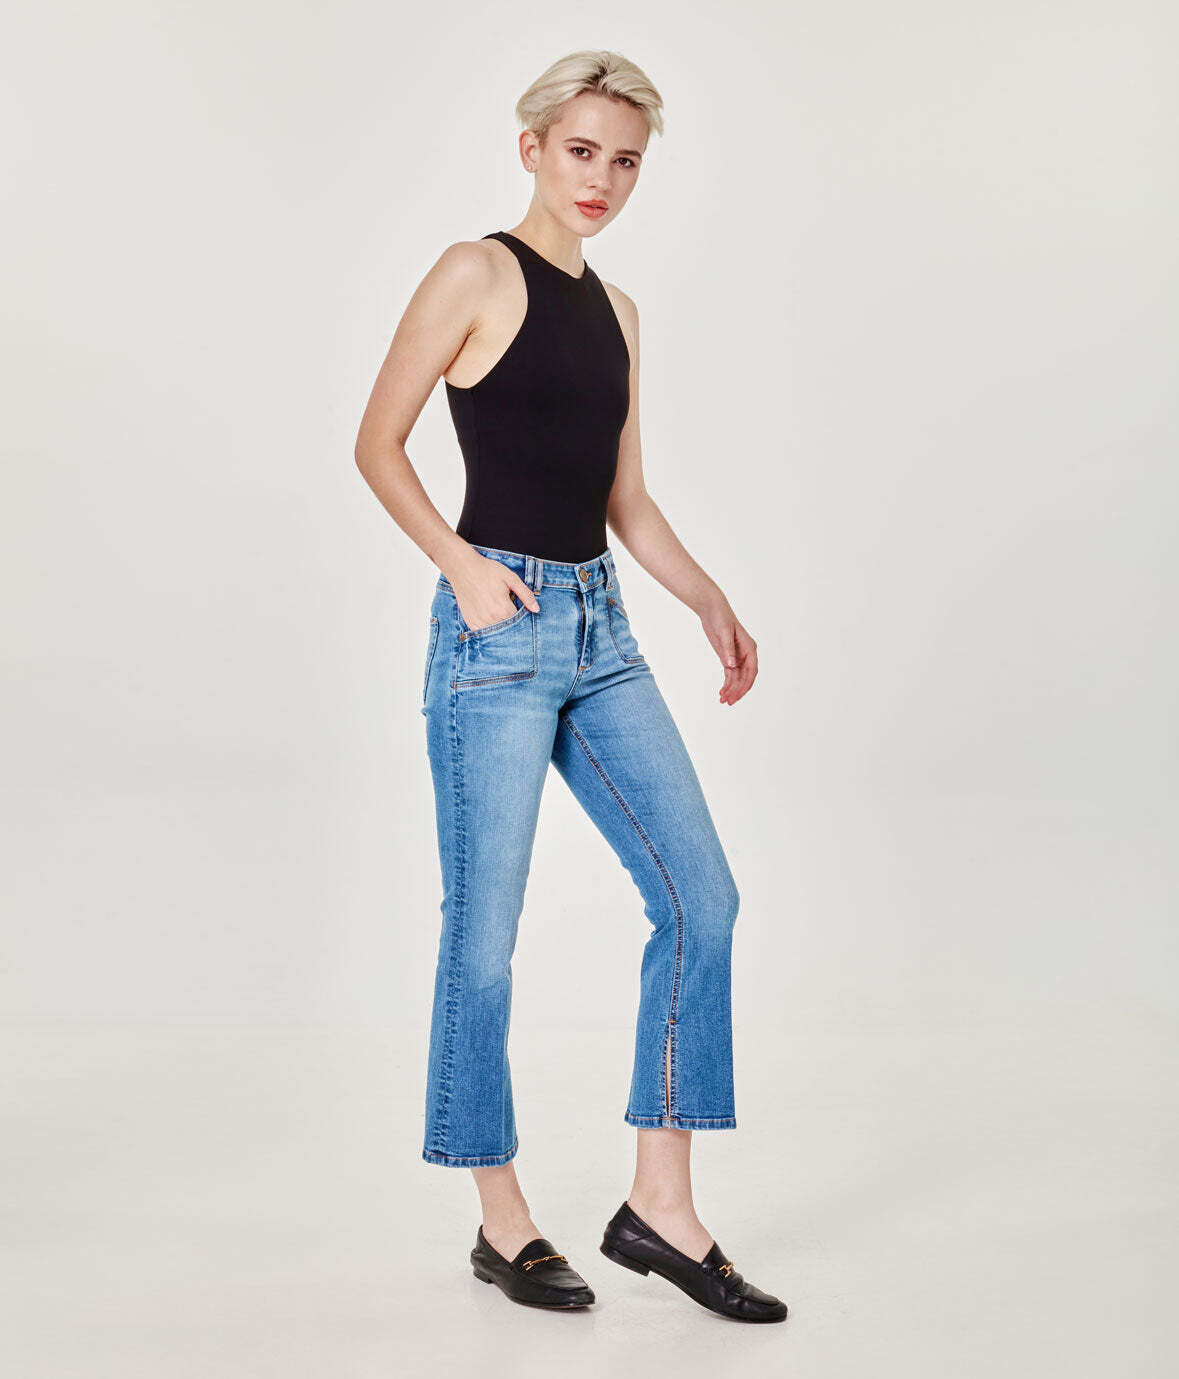 Lola Jeans Mid Rise Bootcut Jeans